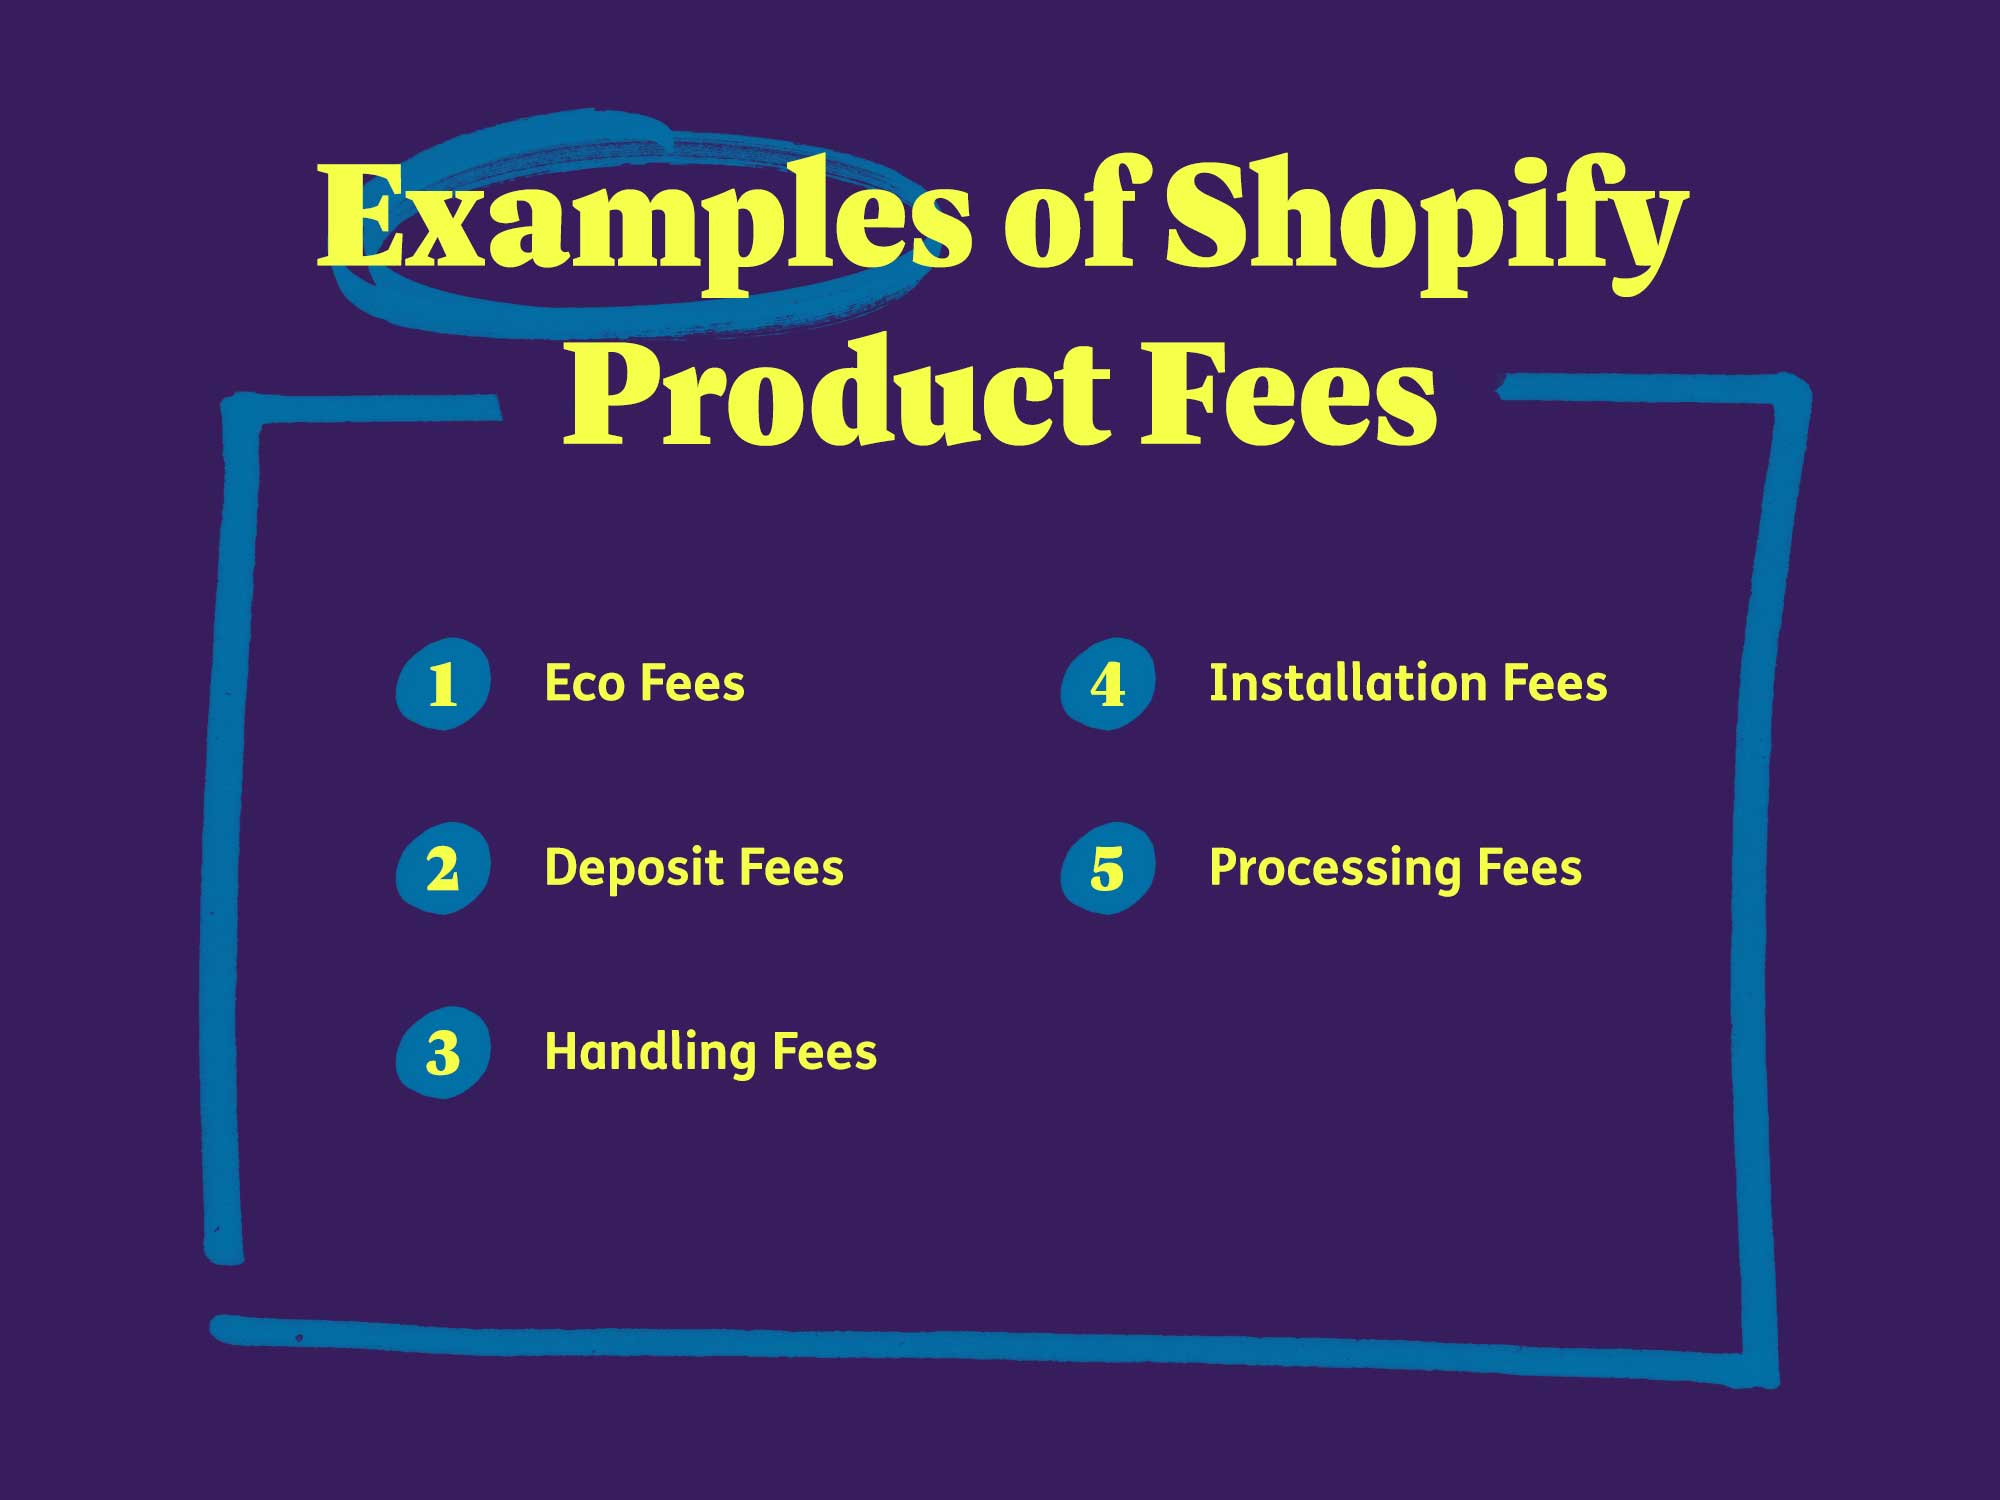 Examples of Shopify product fees: Eco fees, deposit fees, handling fees, installation fees, processing fees